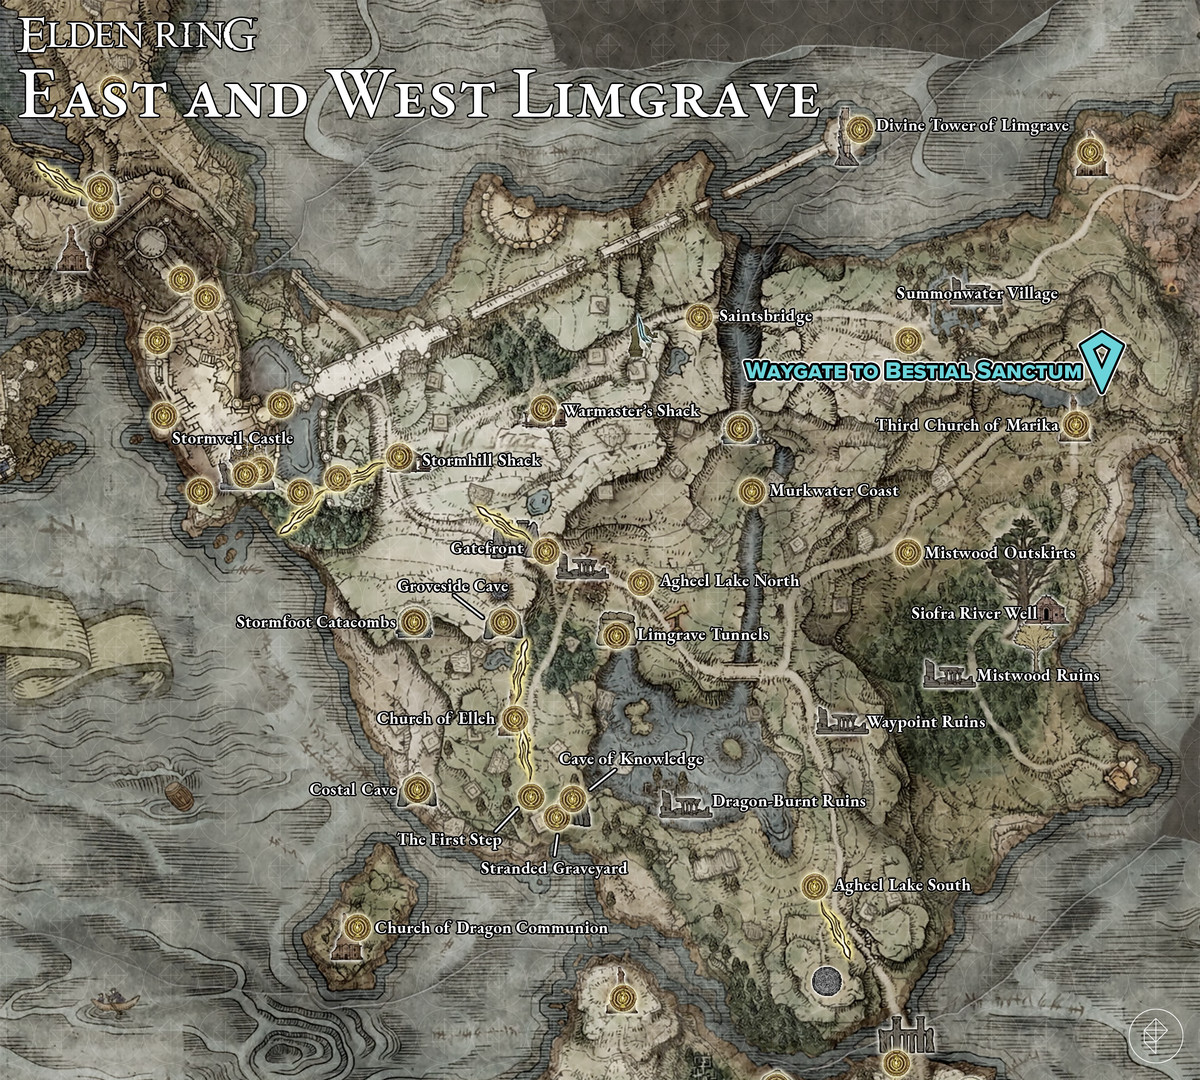 Elden Ring map of Limgrave with a pin showing the location of the Bestial Sanctum gateway.